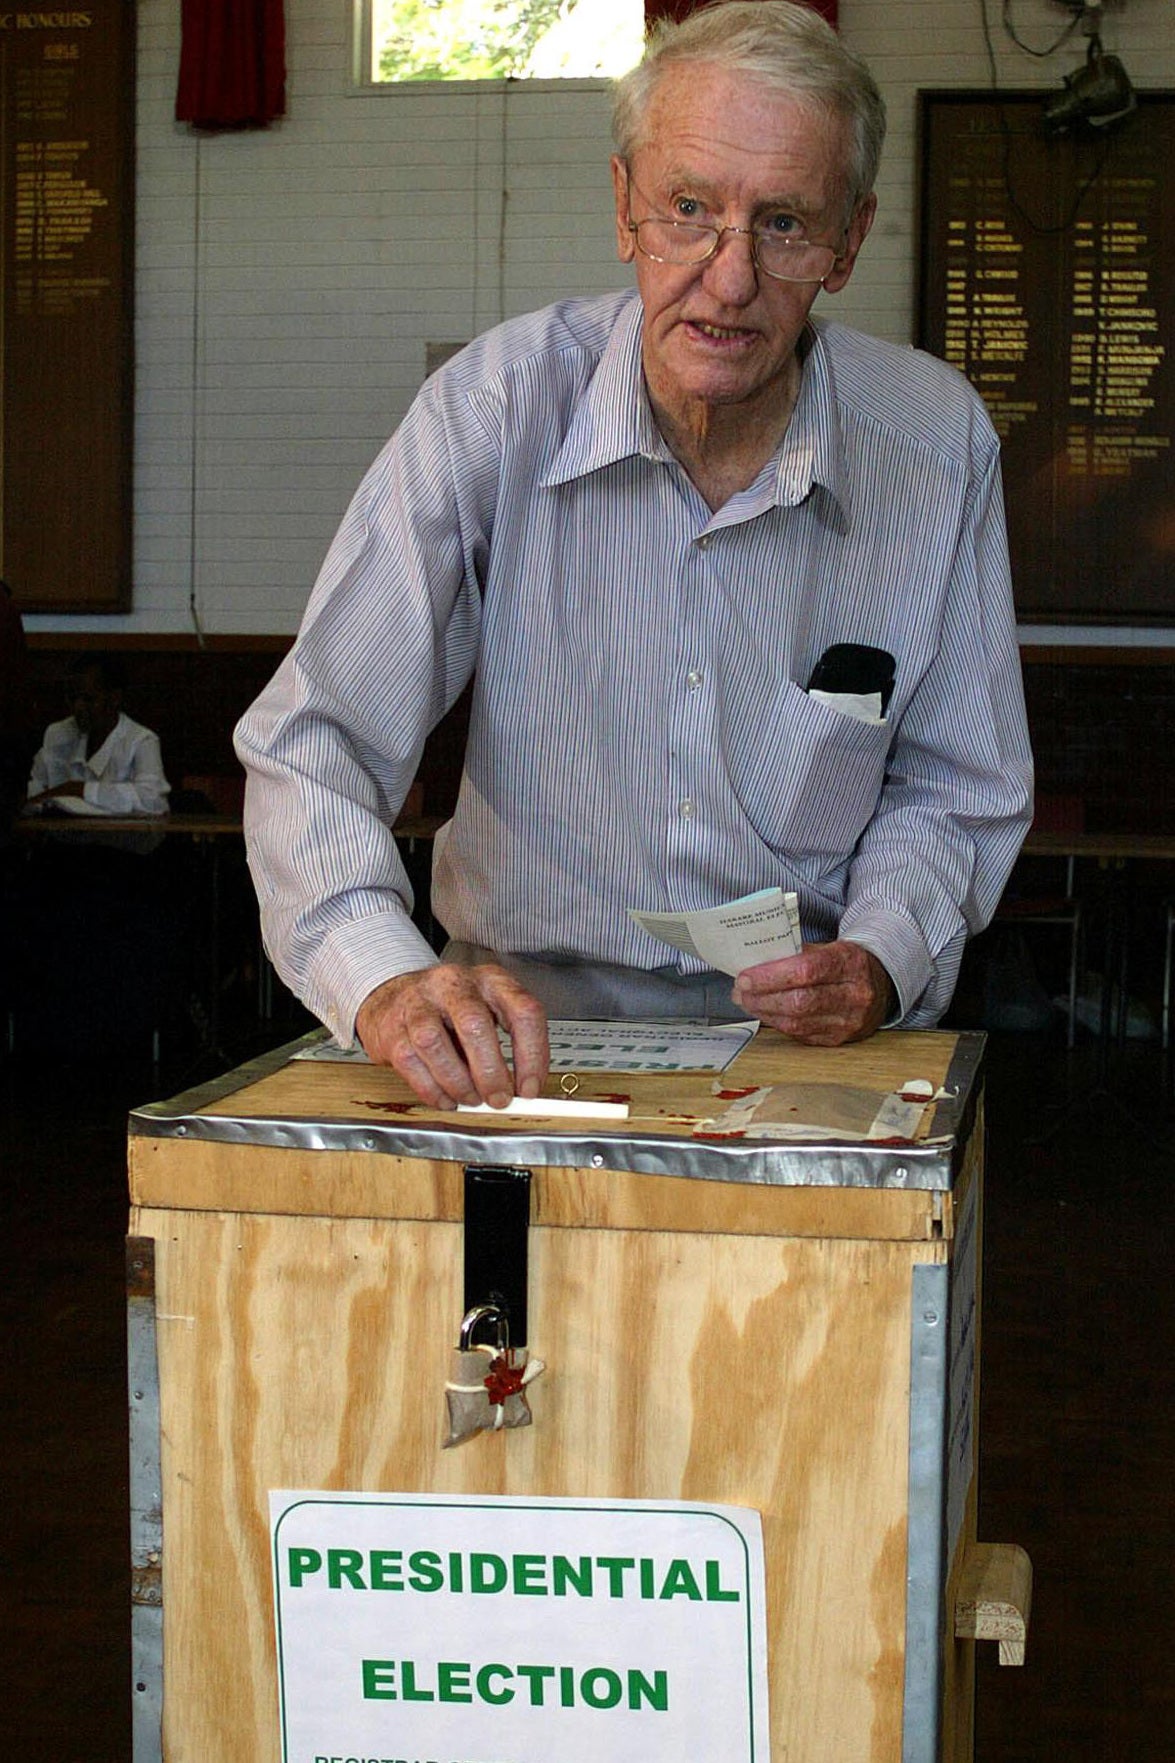 Smith casts a vote in 2002